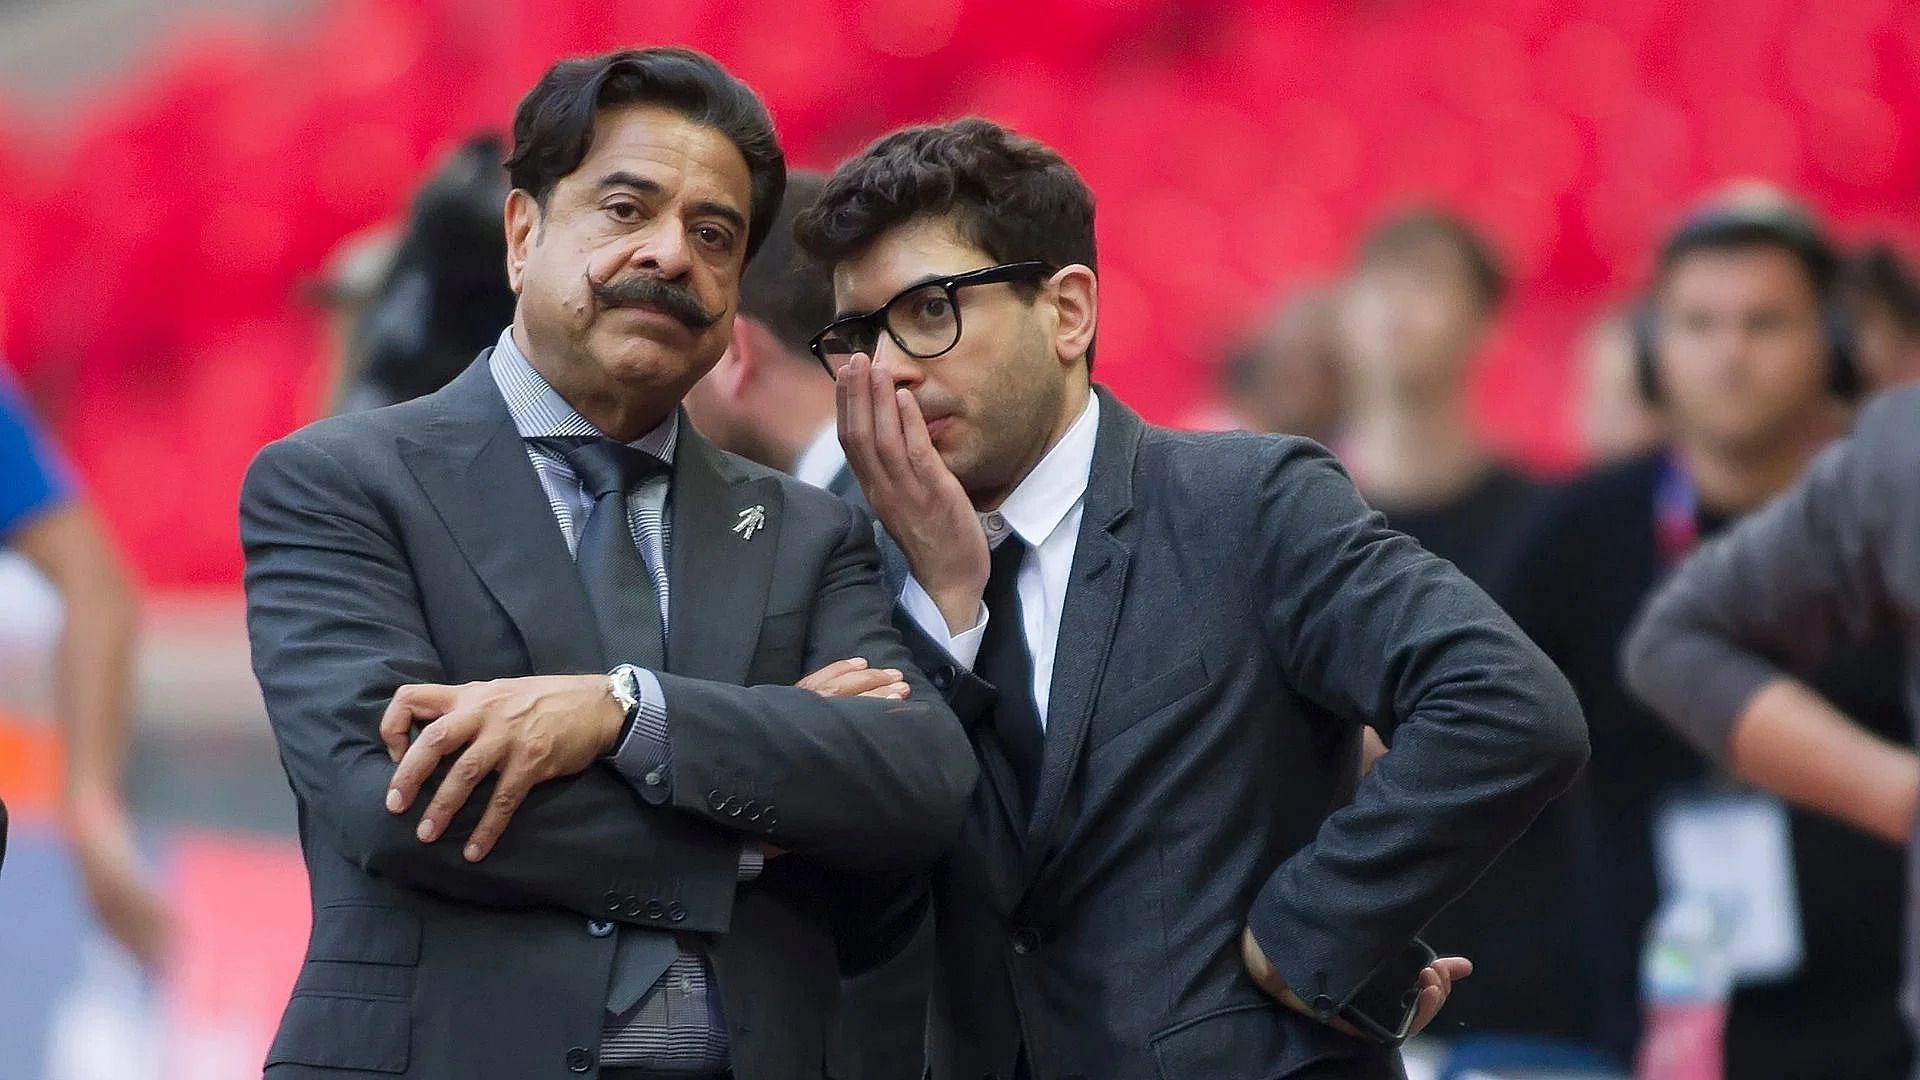 AEW owners Shad Khan and his son Tony Khan [courtesy of The Times of London]